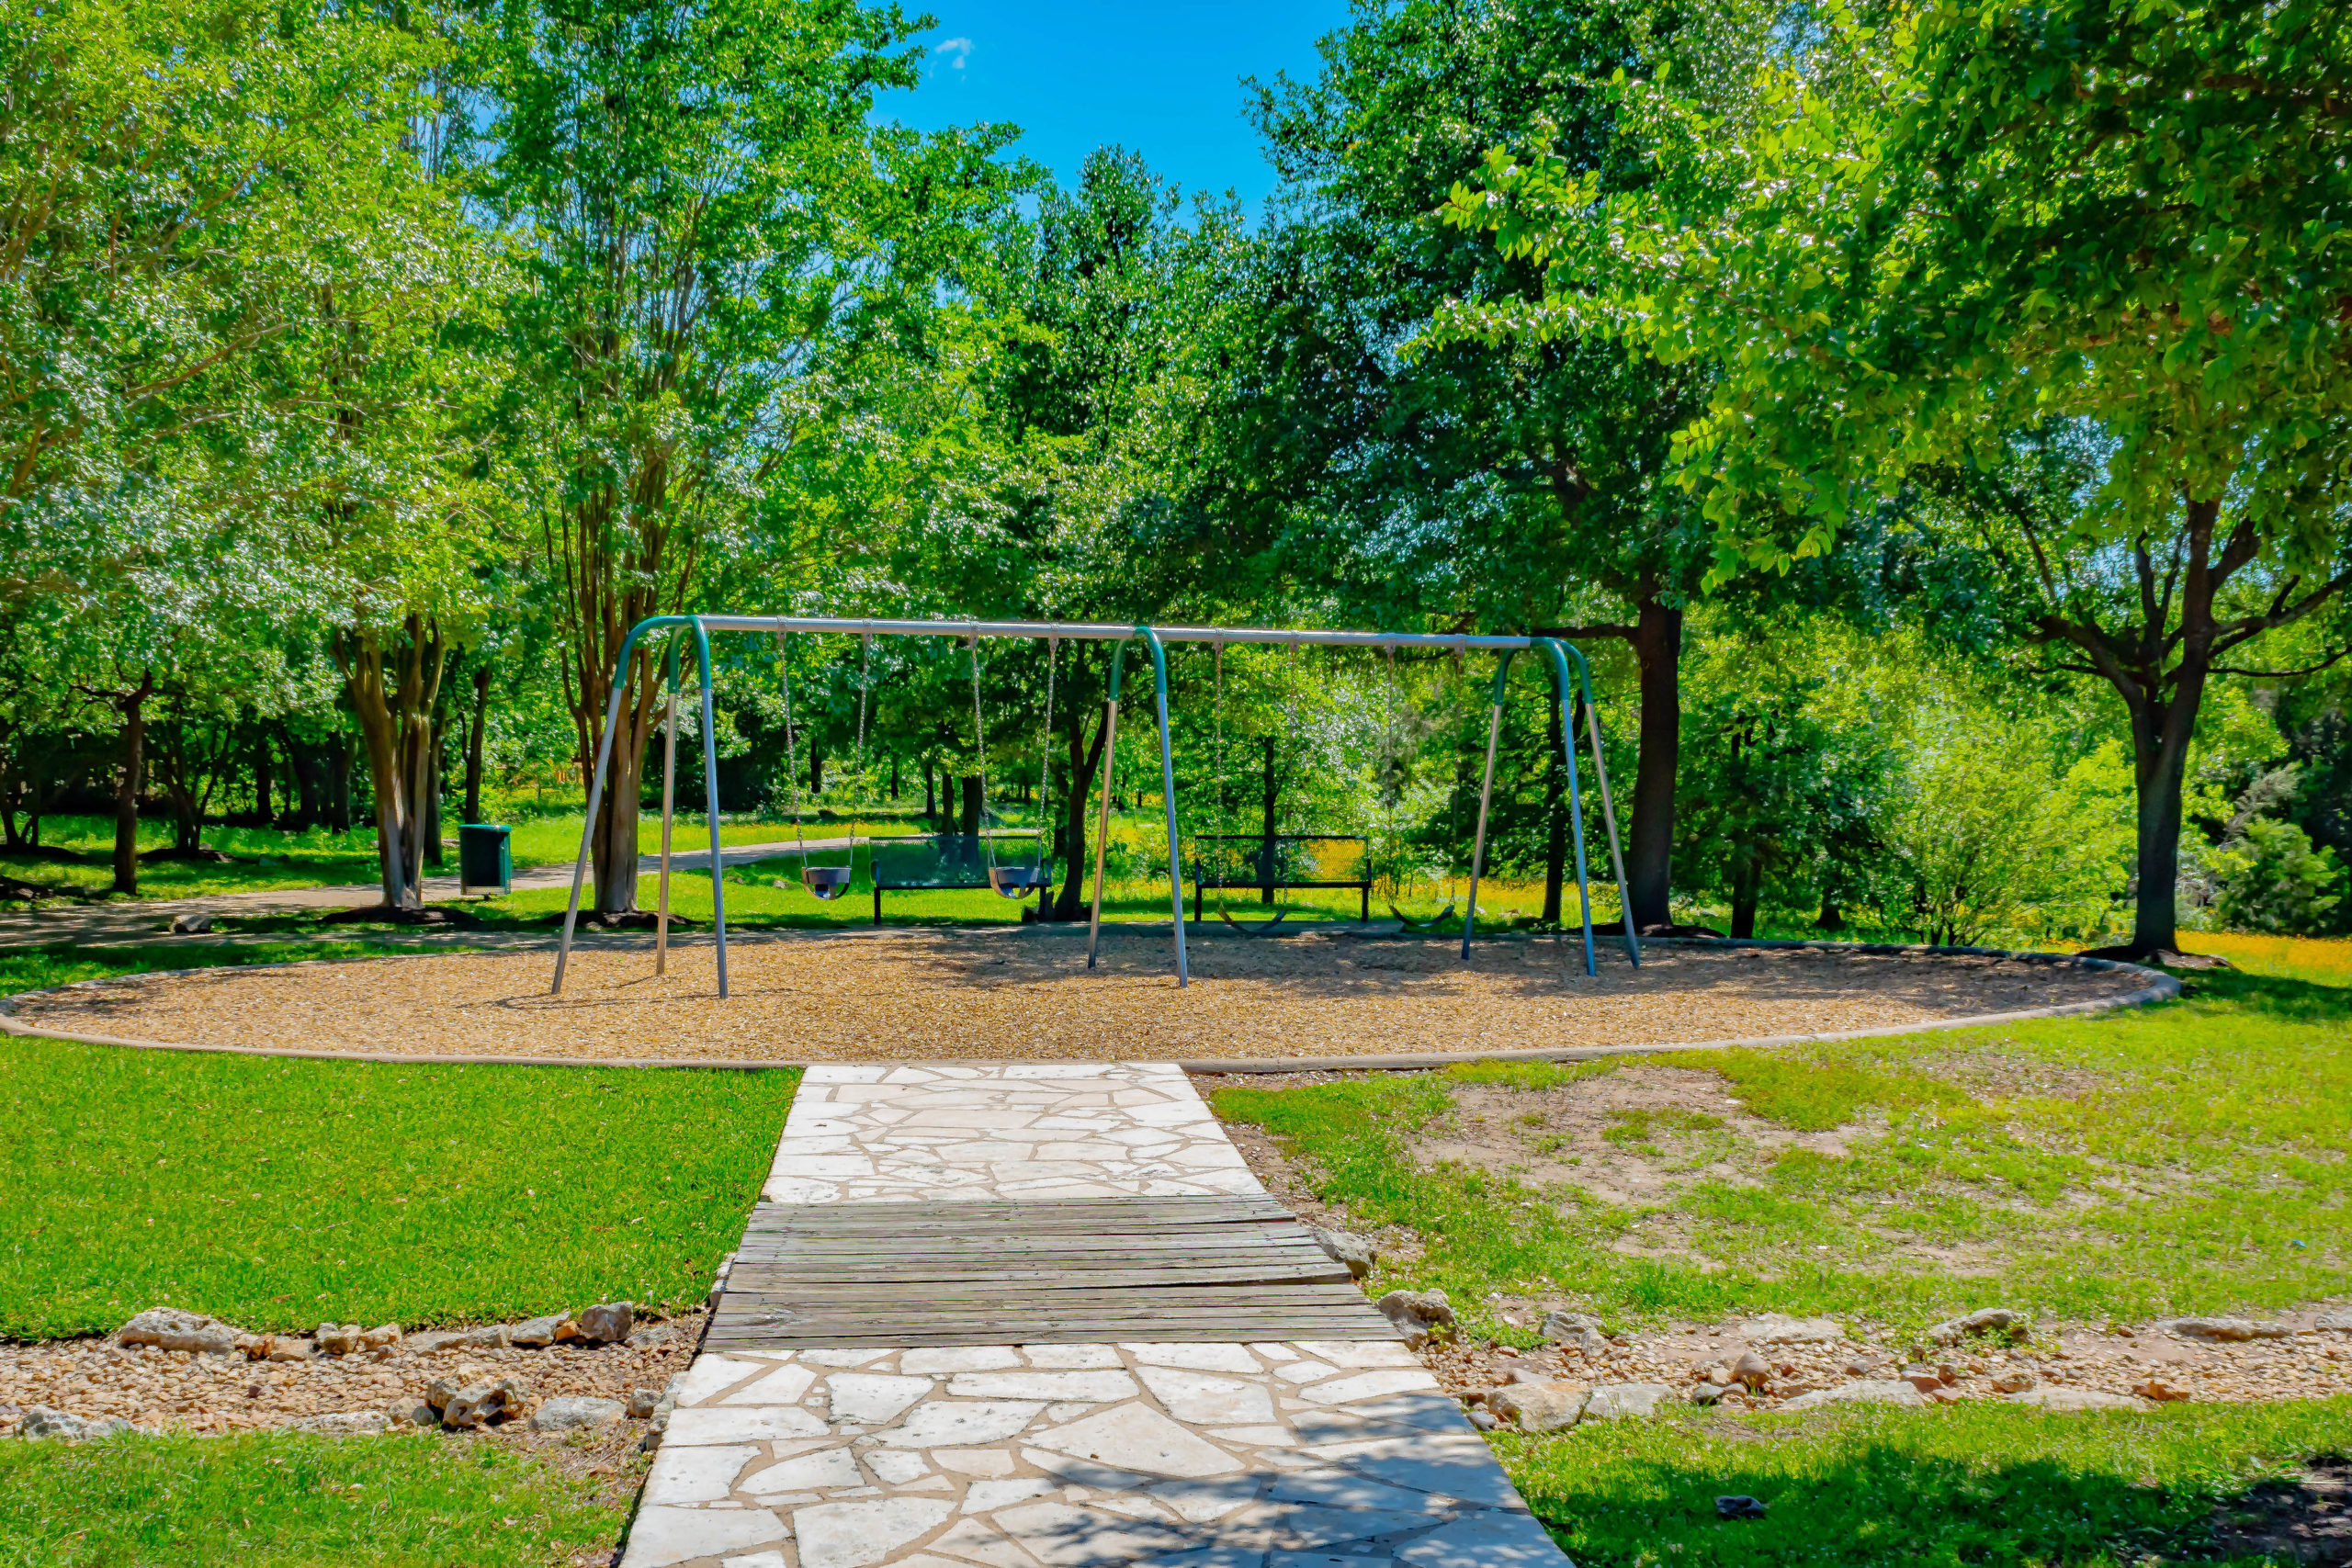 Picture of a stone path leading to a swing set.